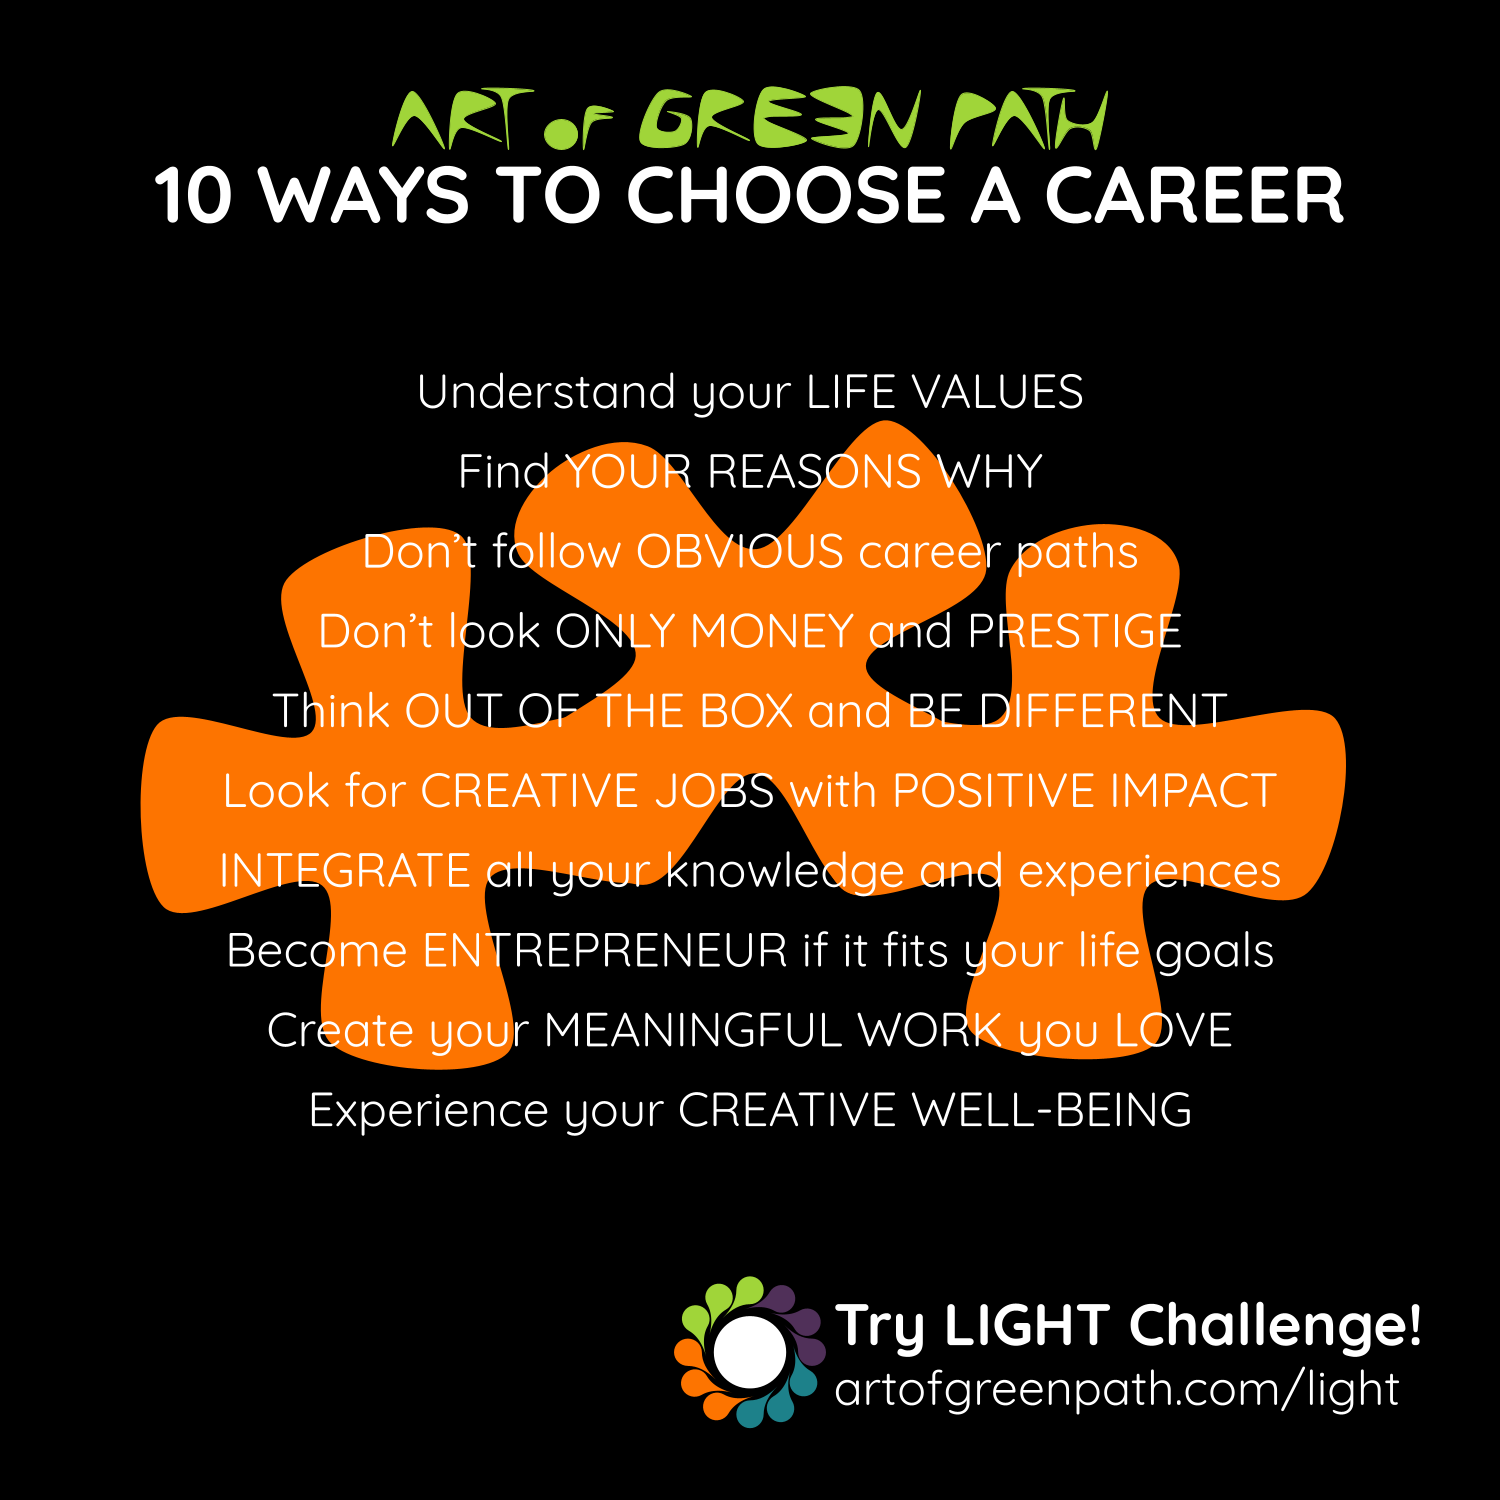 Art Of Green Path - Career Change - How To Choose A Career